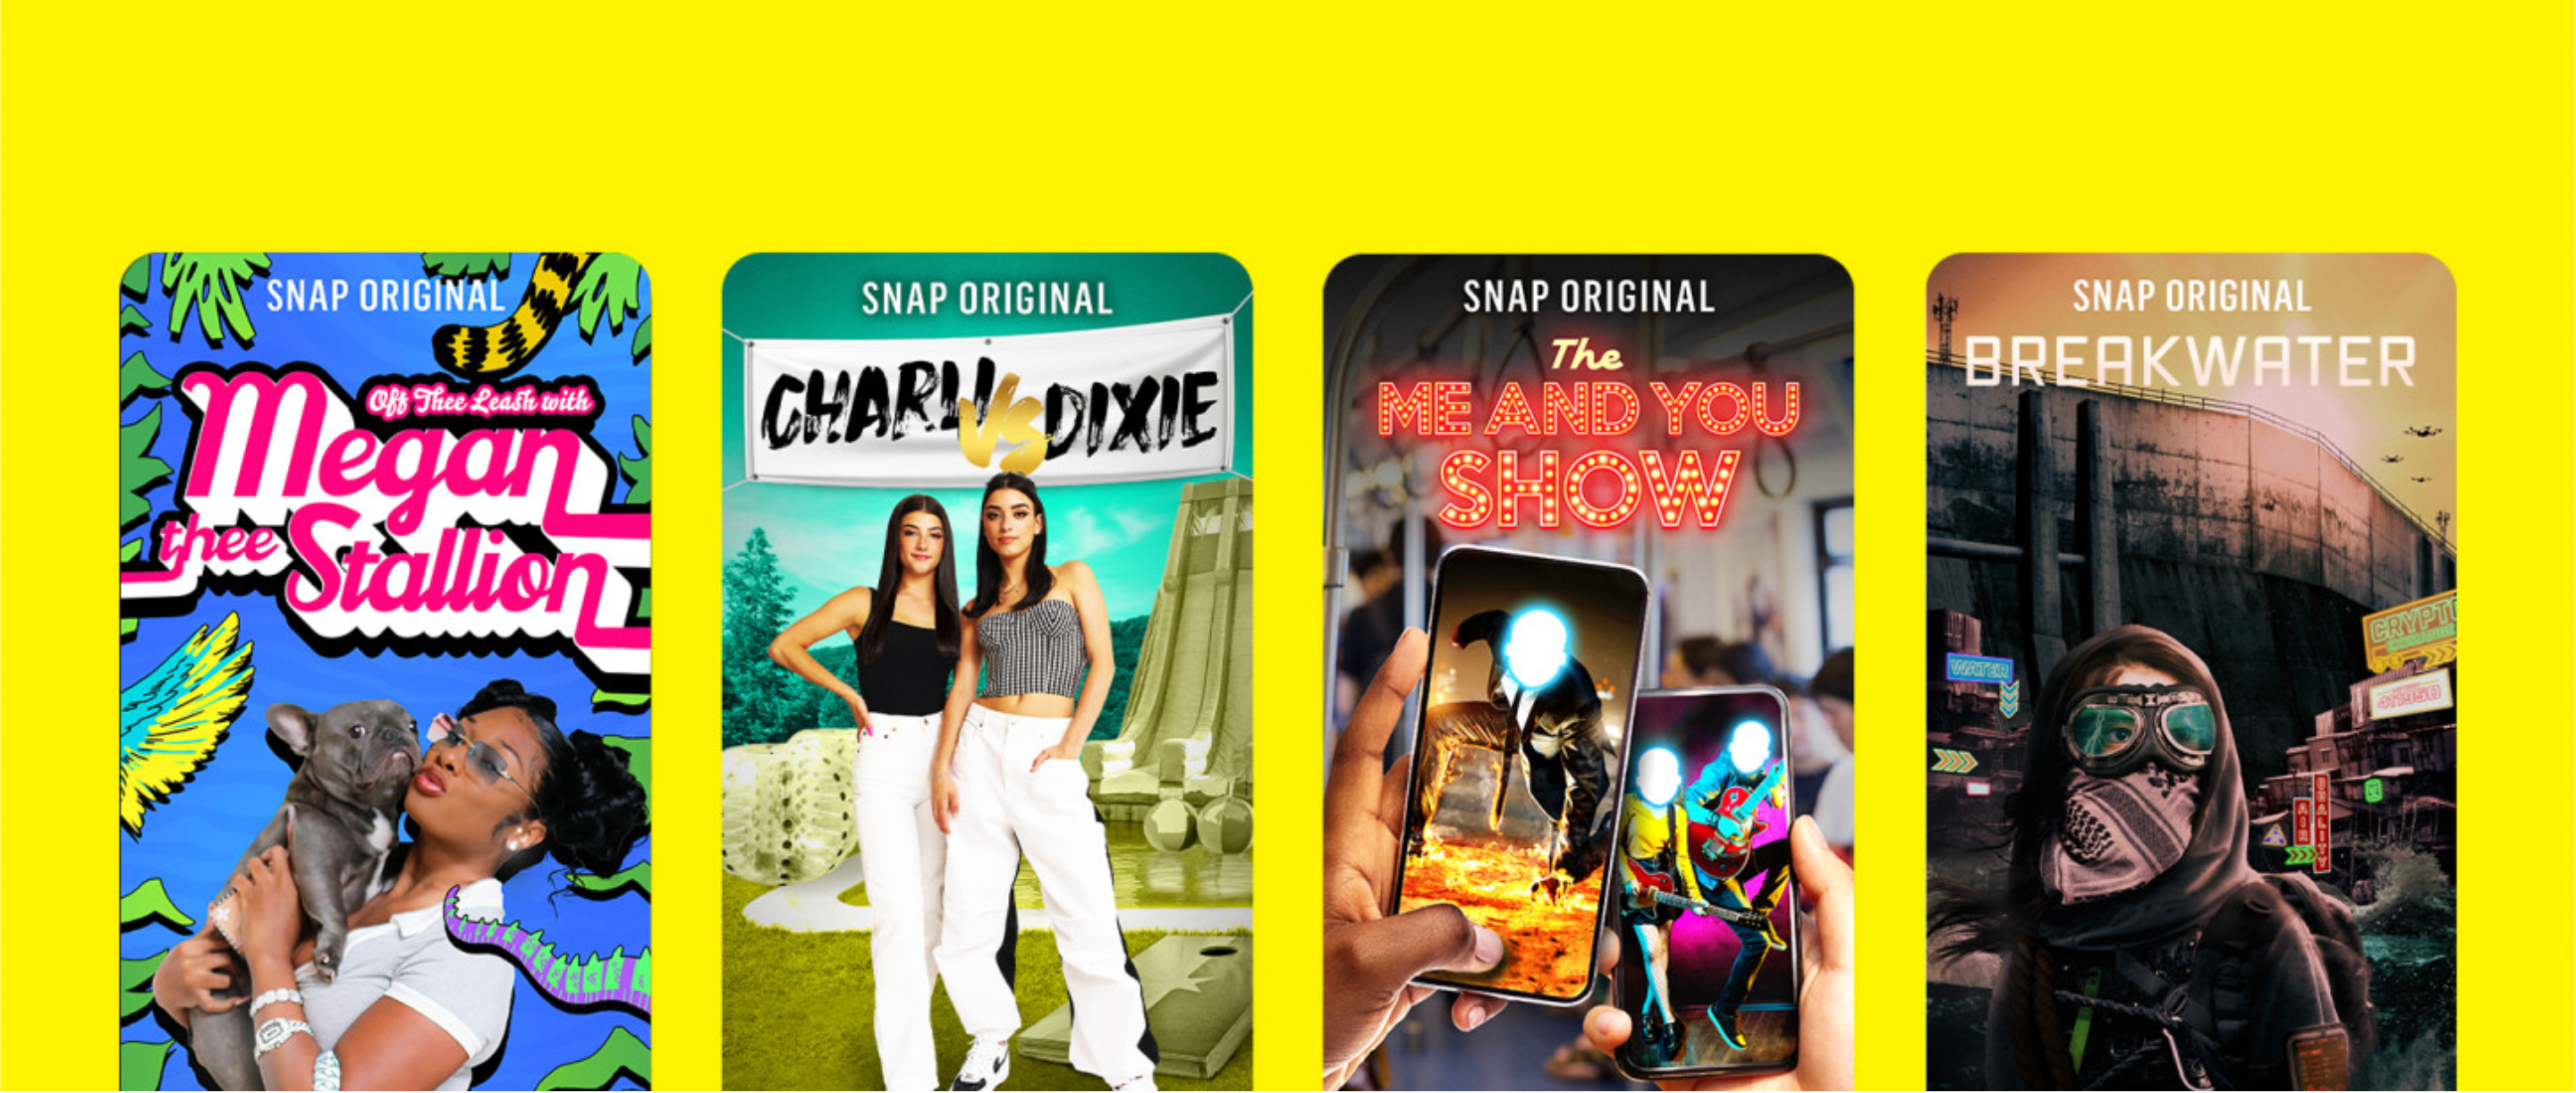 Snapchat's promotional image for the new range of Snap Originals